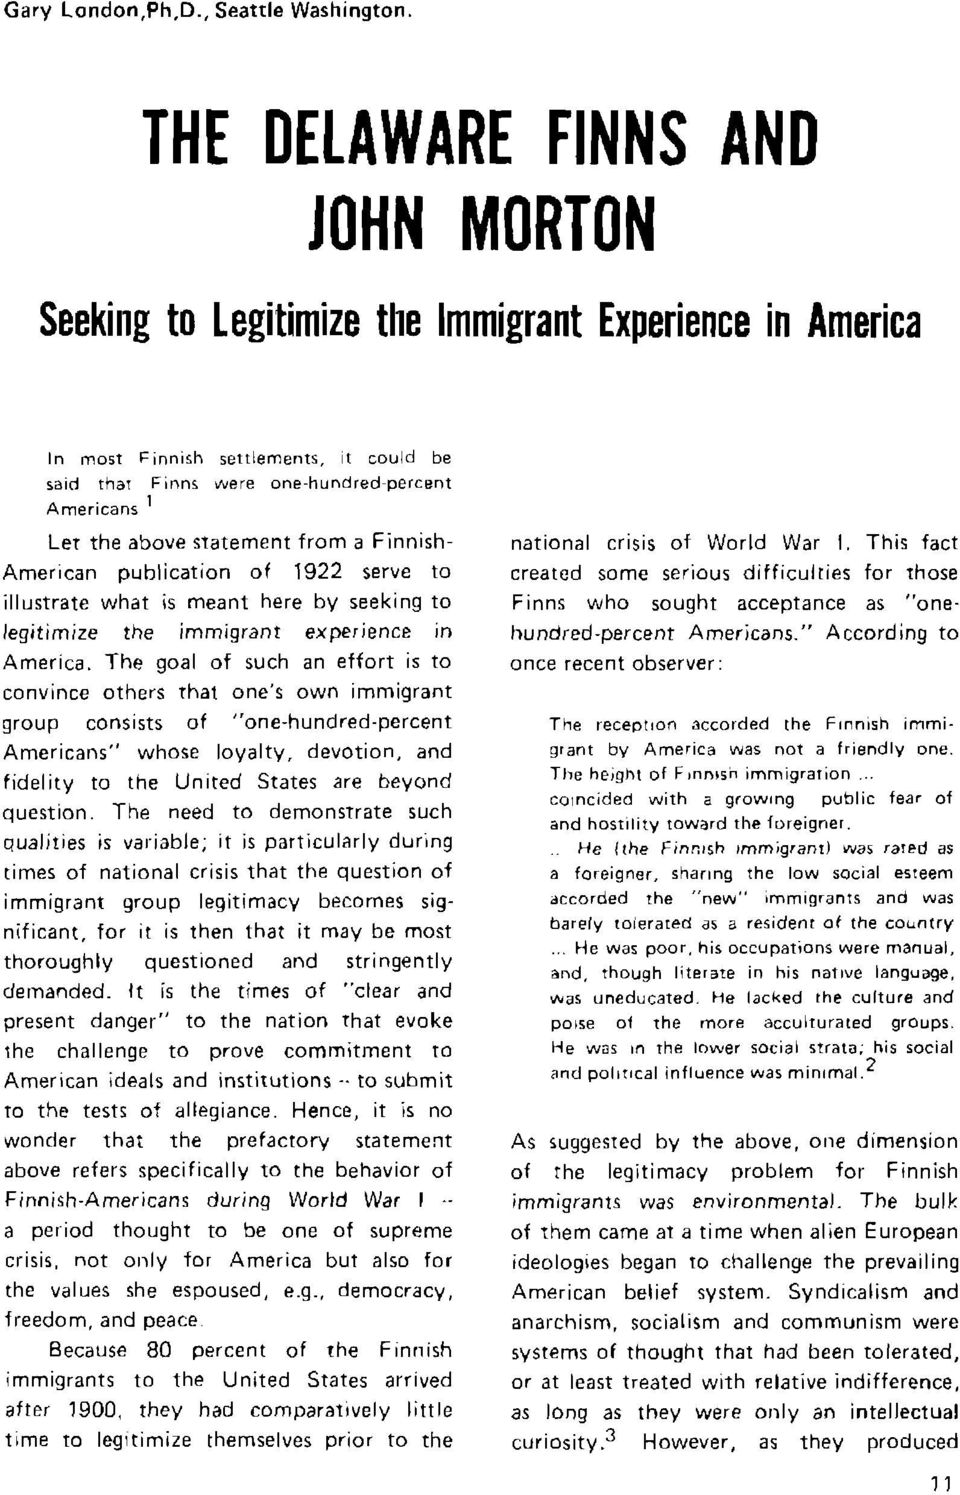 statement from a Finnish American publication of 1922 serve to illustrate what is meant here by seeking to legitimrze tne imm;9ranl experience in Ameflcd.